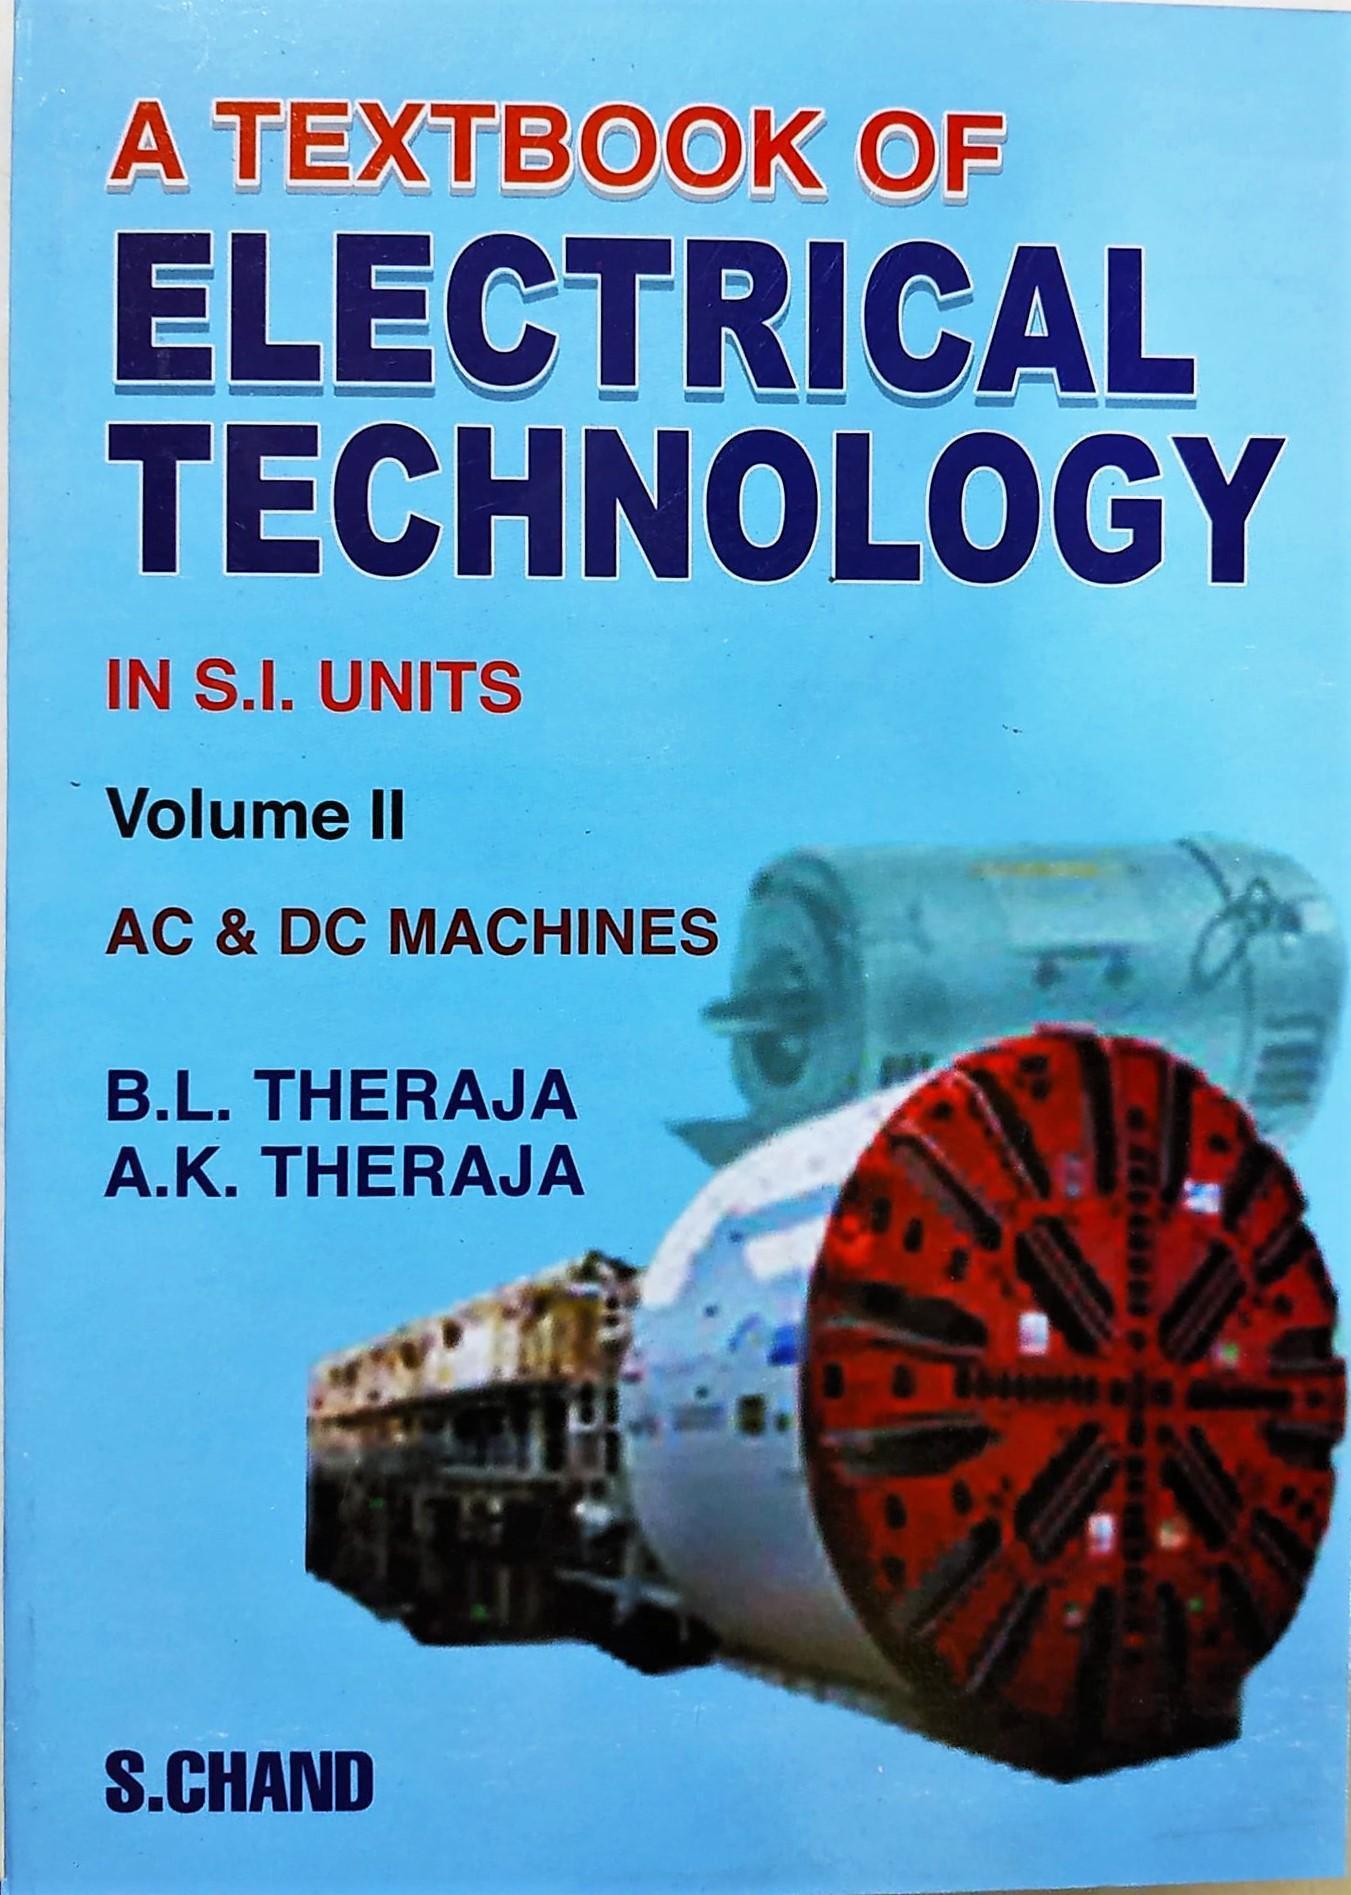 A Textbook of Electrical Technology Volume II AC and DC machines by Theraja